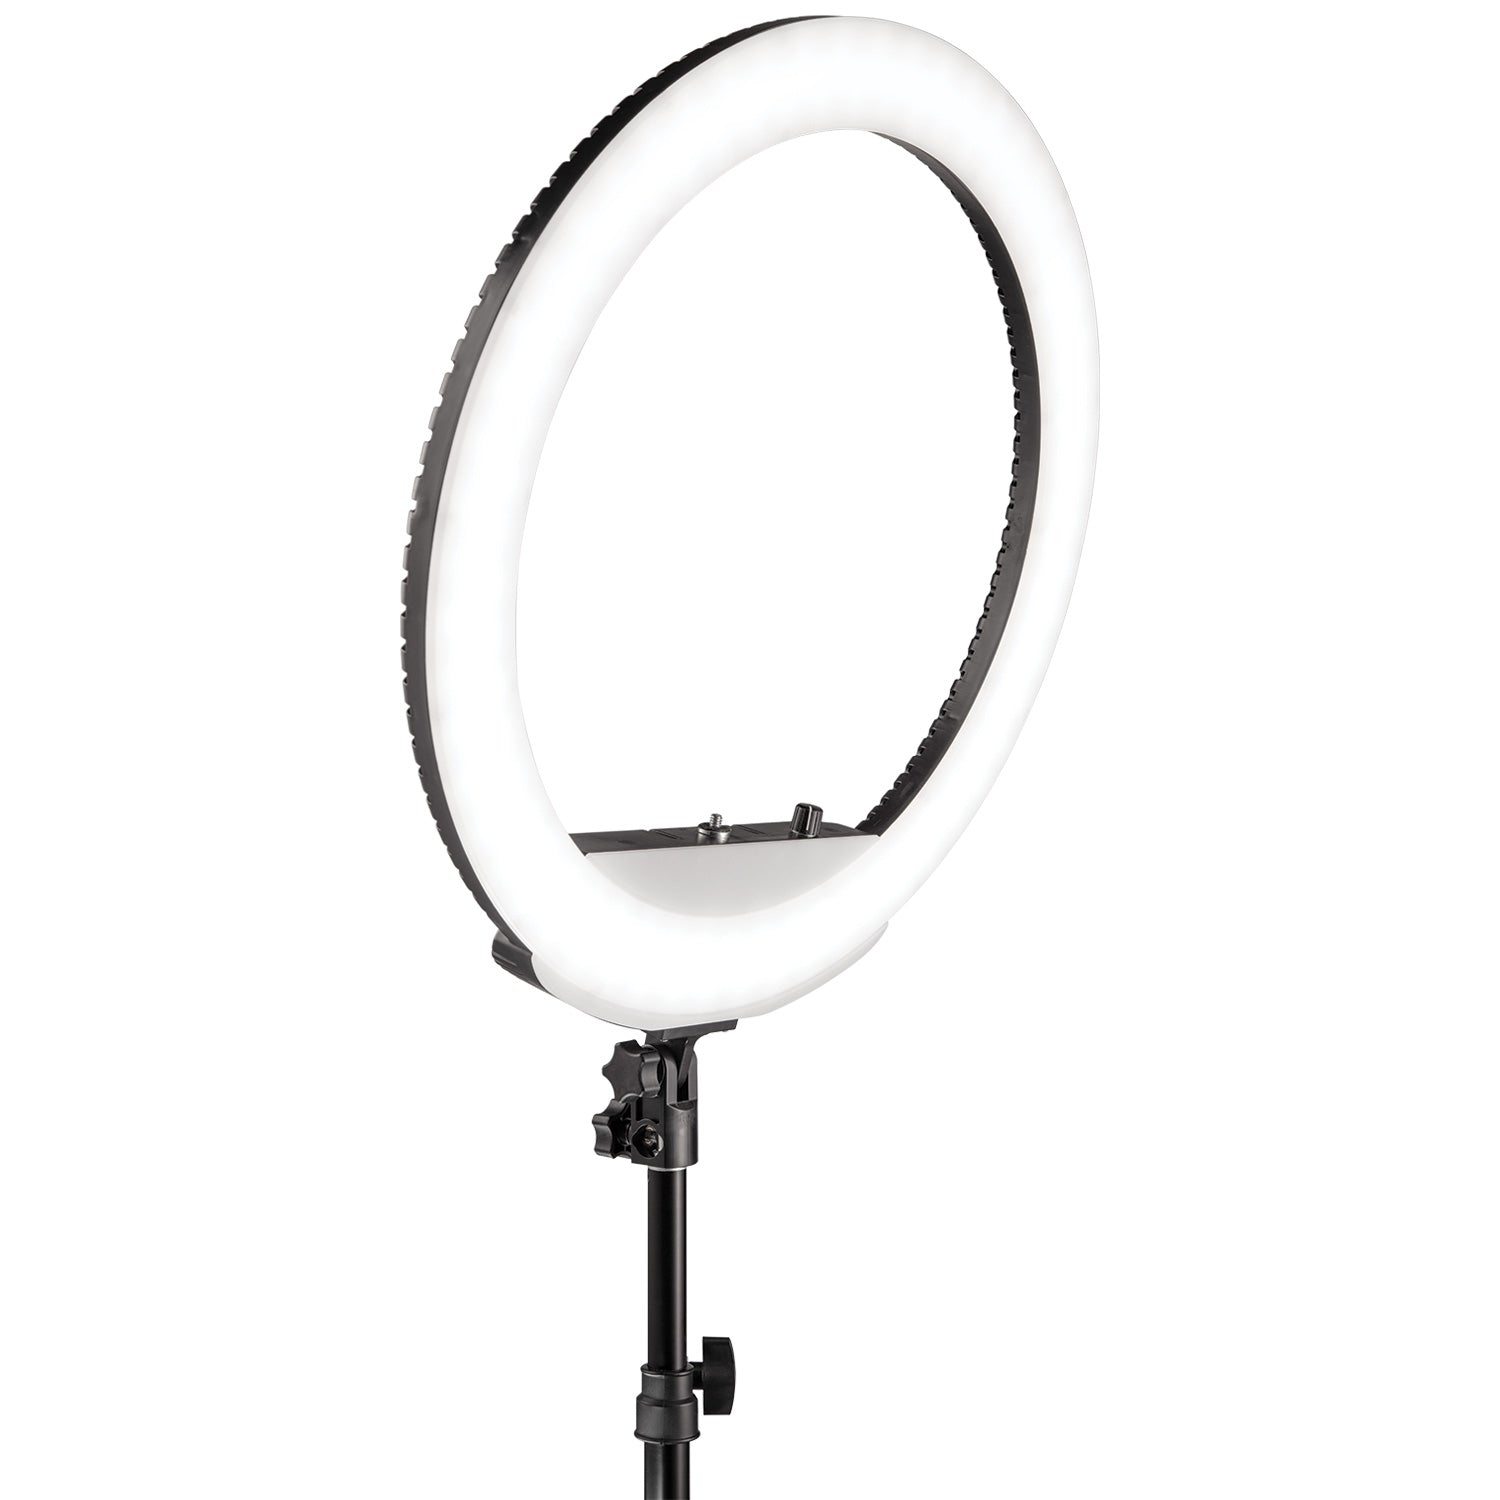 Hair depot - Limited Time Deal! 18” Ring Light Just $39.99